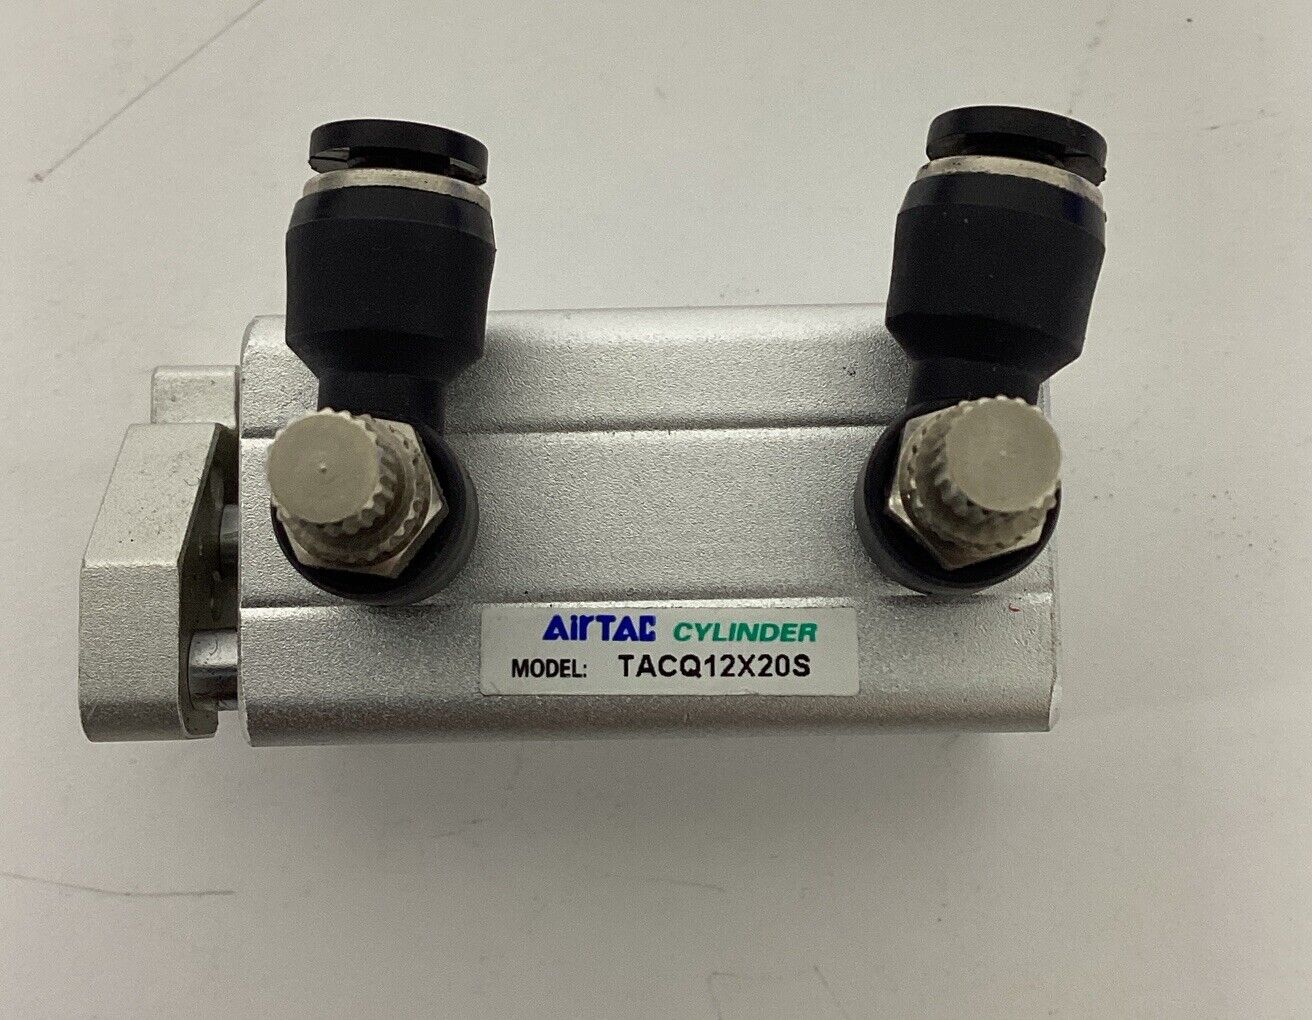 Airtac TACQ12X20S Compact Guided Air Cylinder w/Flow Valves (RE147)